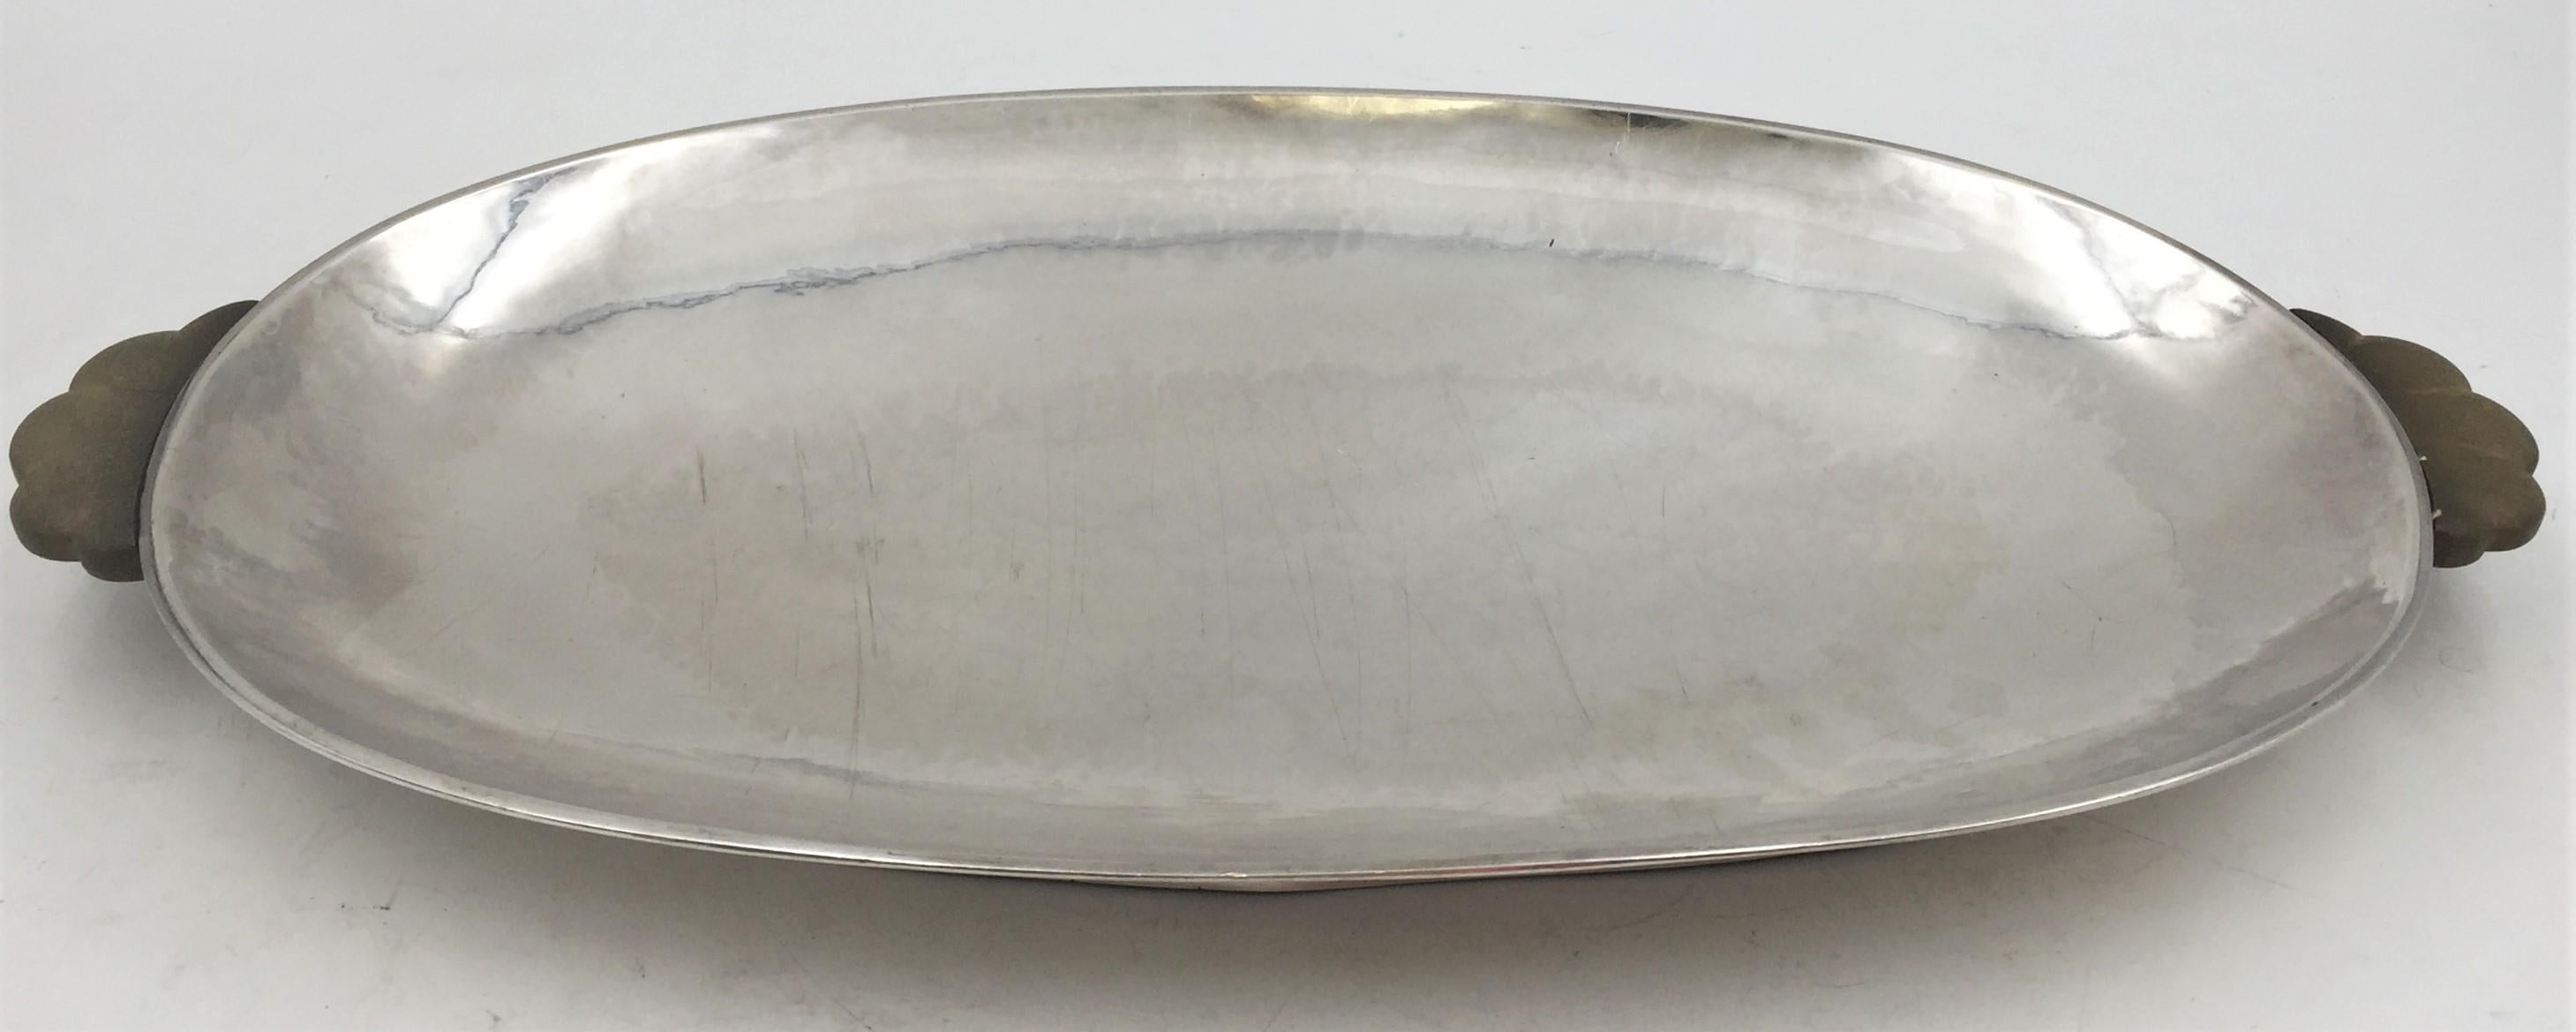 Norwegian continental 0.830 silver hand hammered centerpiece tray in desirable Art Deco style standing on a footed base with original wood handles, from the early 20th century, measuring 19'' in length by 10'' in width by 1 3/4'' in height, weighing